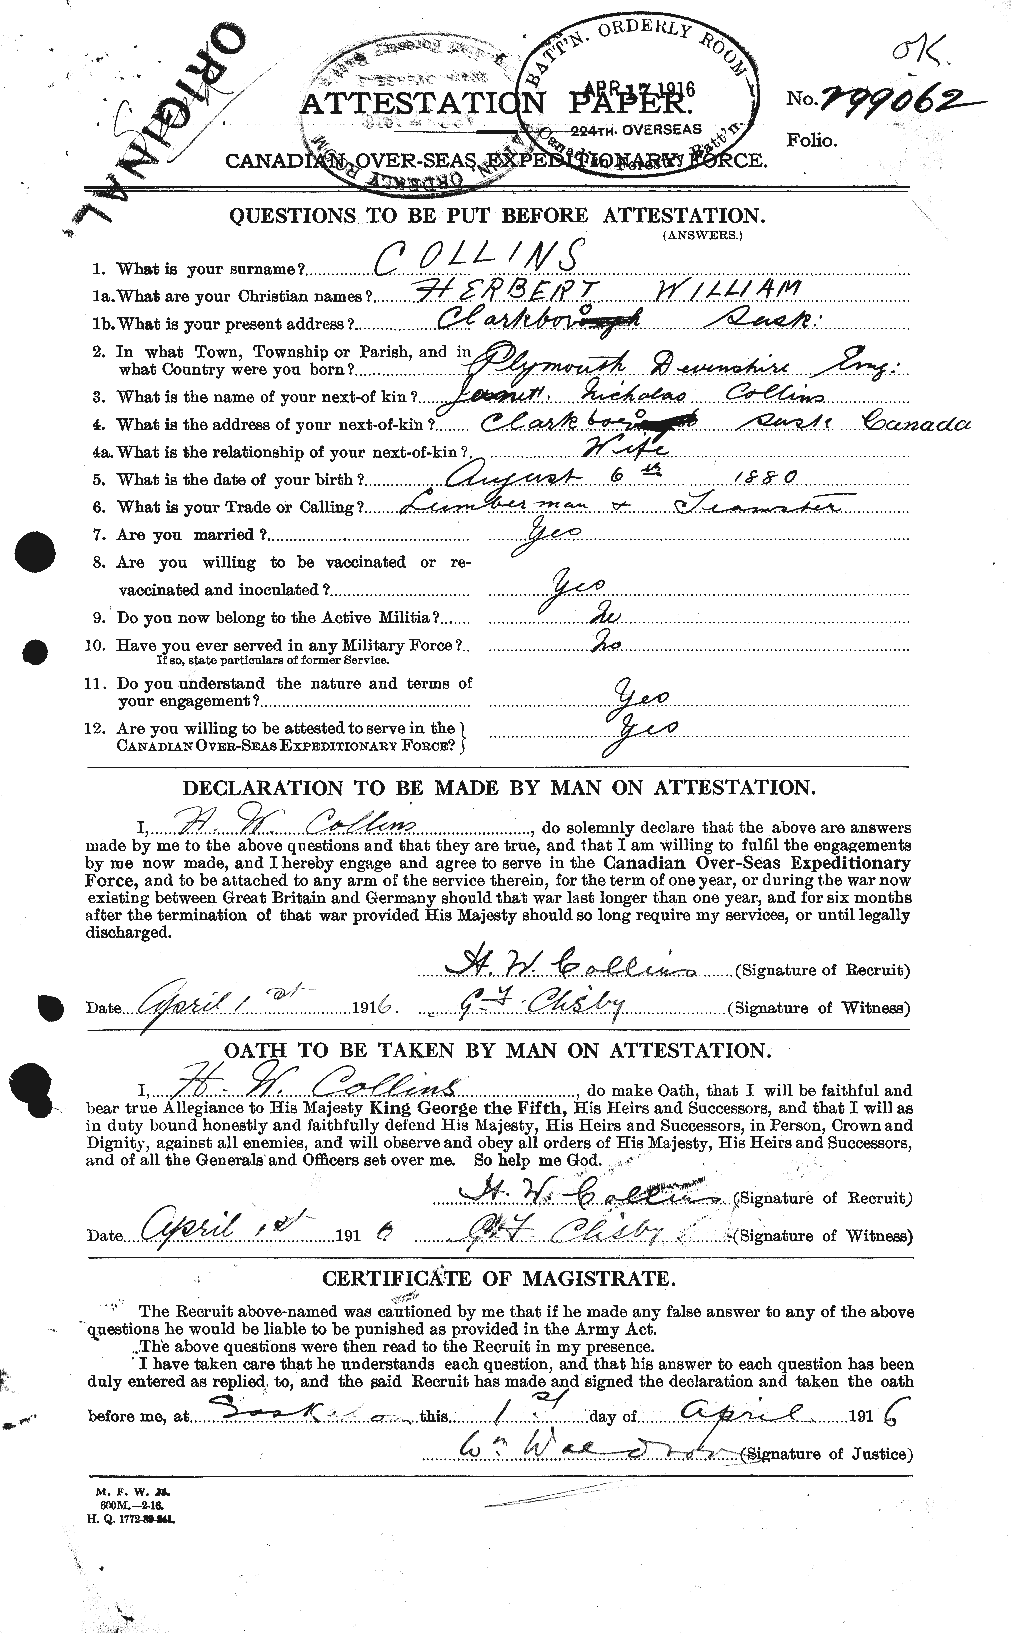 Personnel Records of the First World War - CEF 069997a